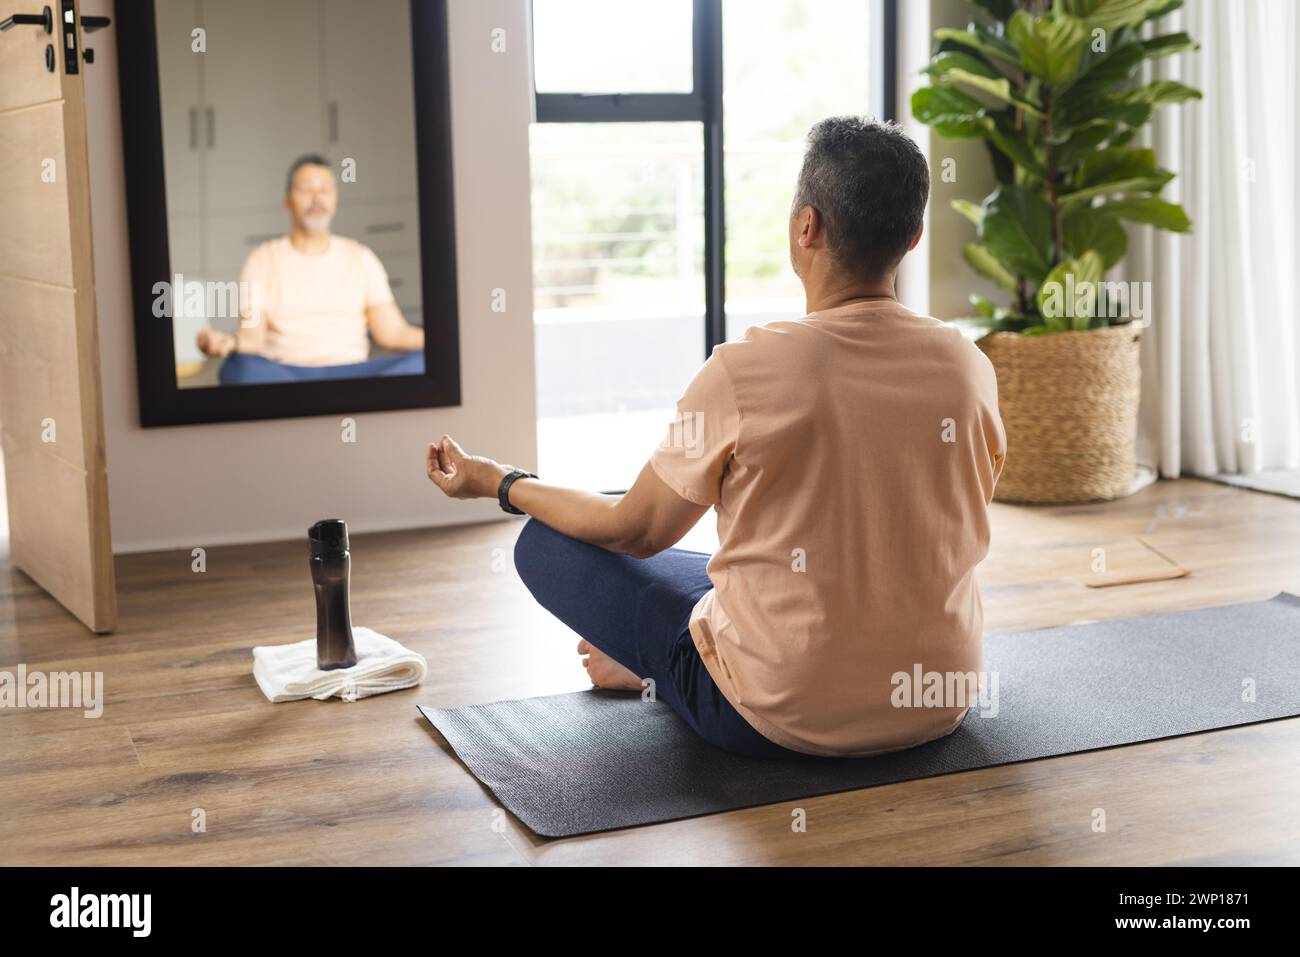 Biracial senior man meditates in front of a mirror, reflecting a peaceful posture Stock Photo